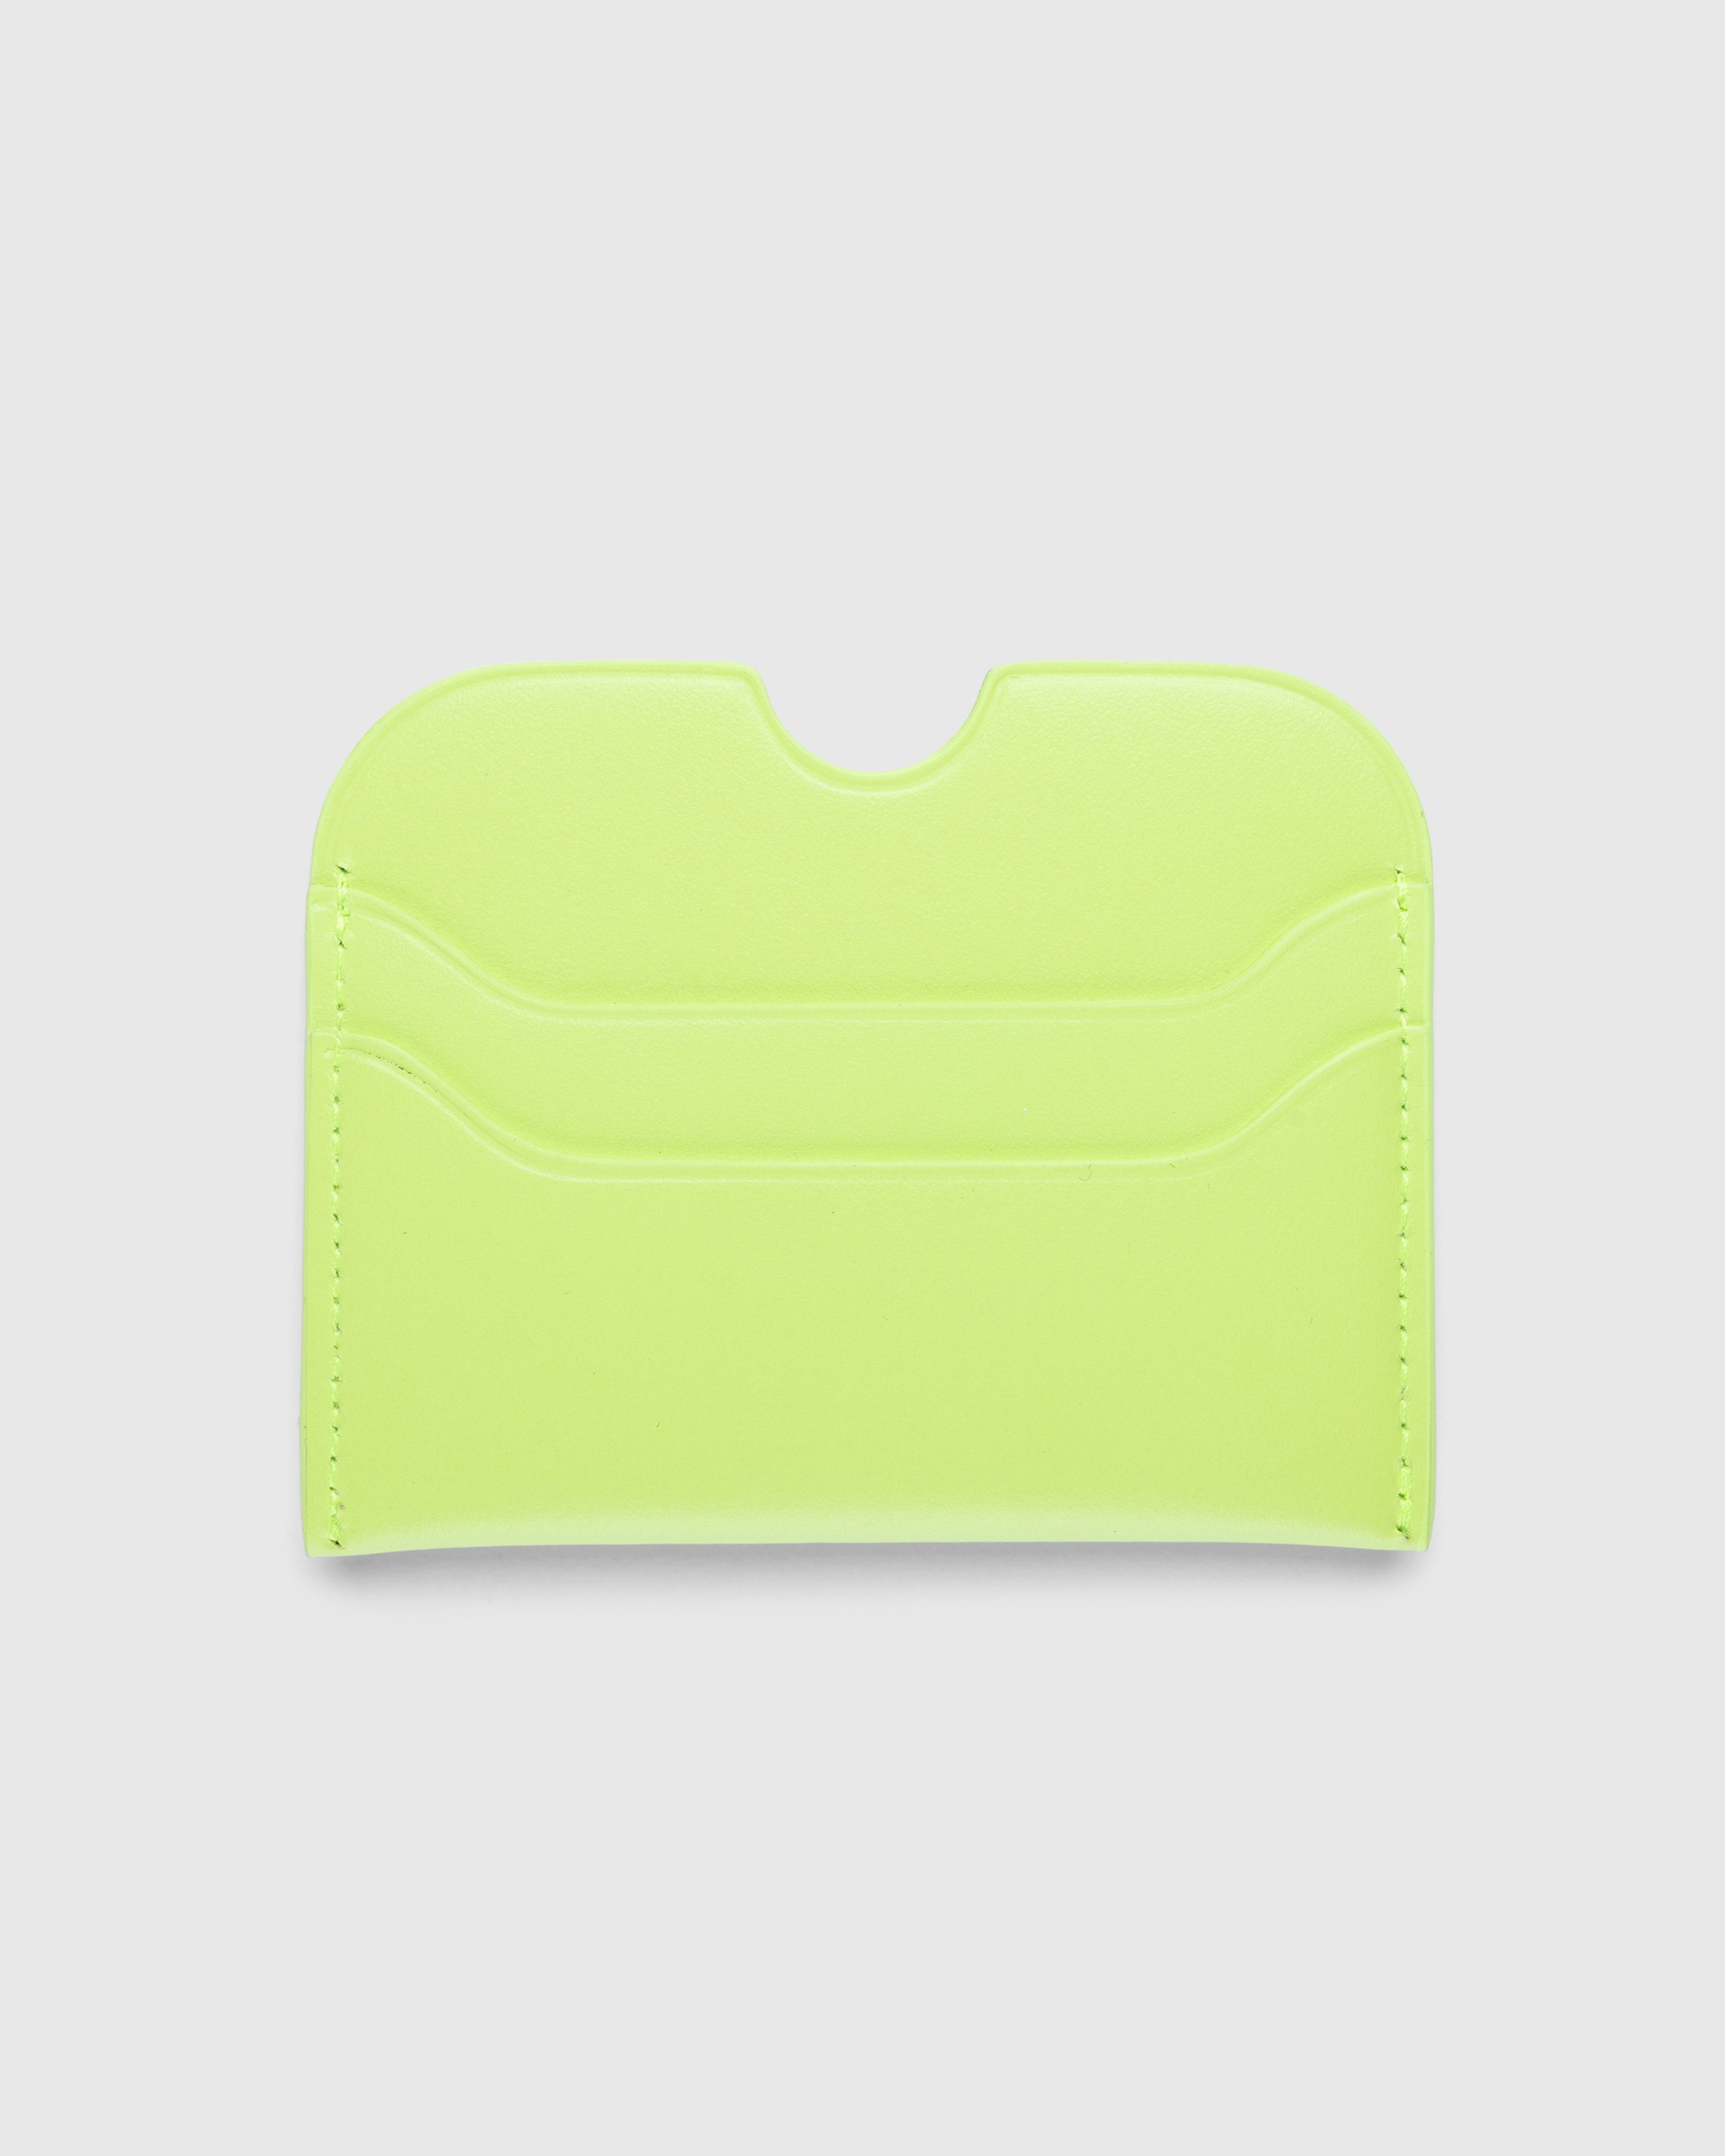 Acne Studios - Leather Card Holder Lime Green - Accessories - Green - Image 2